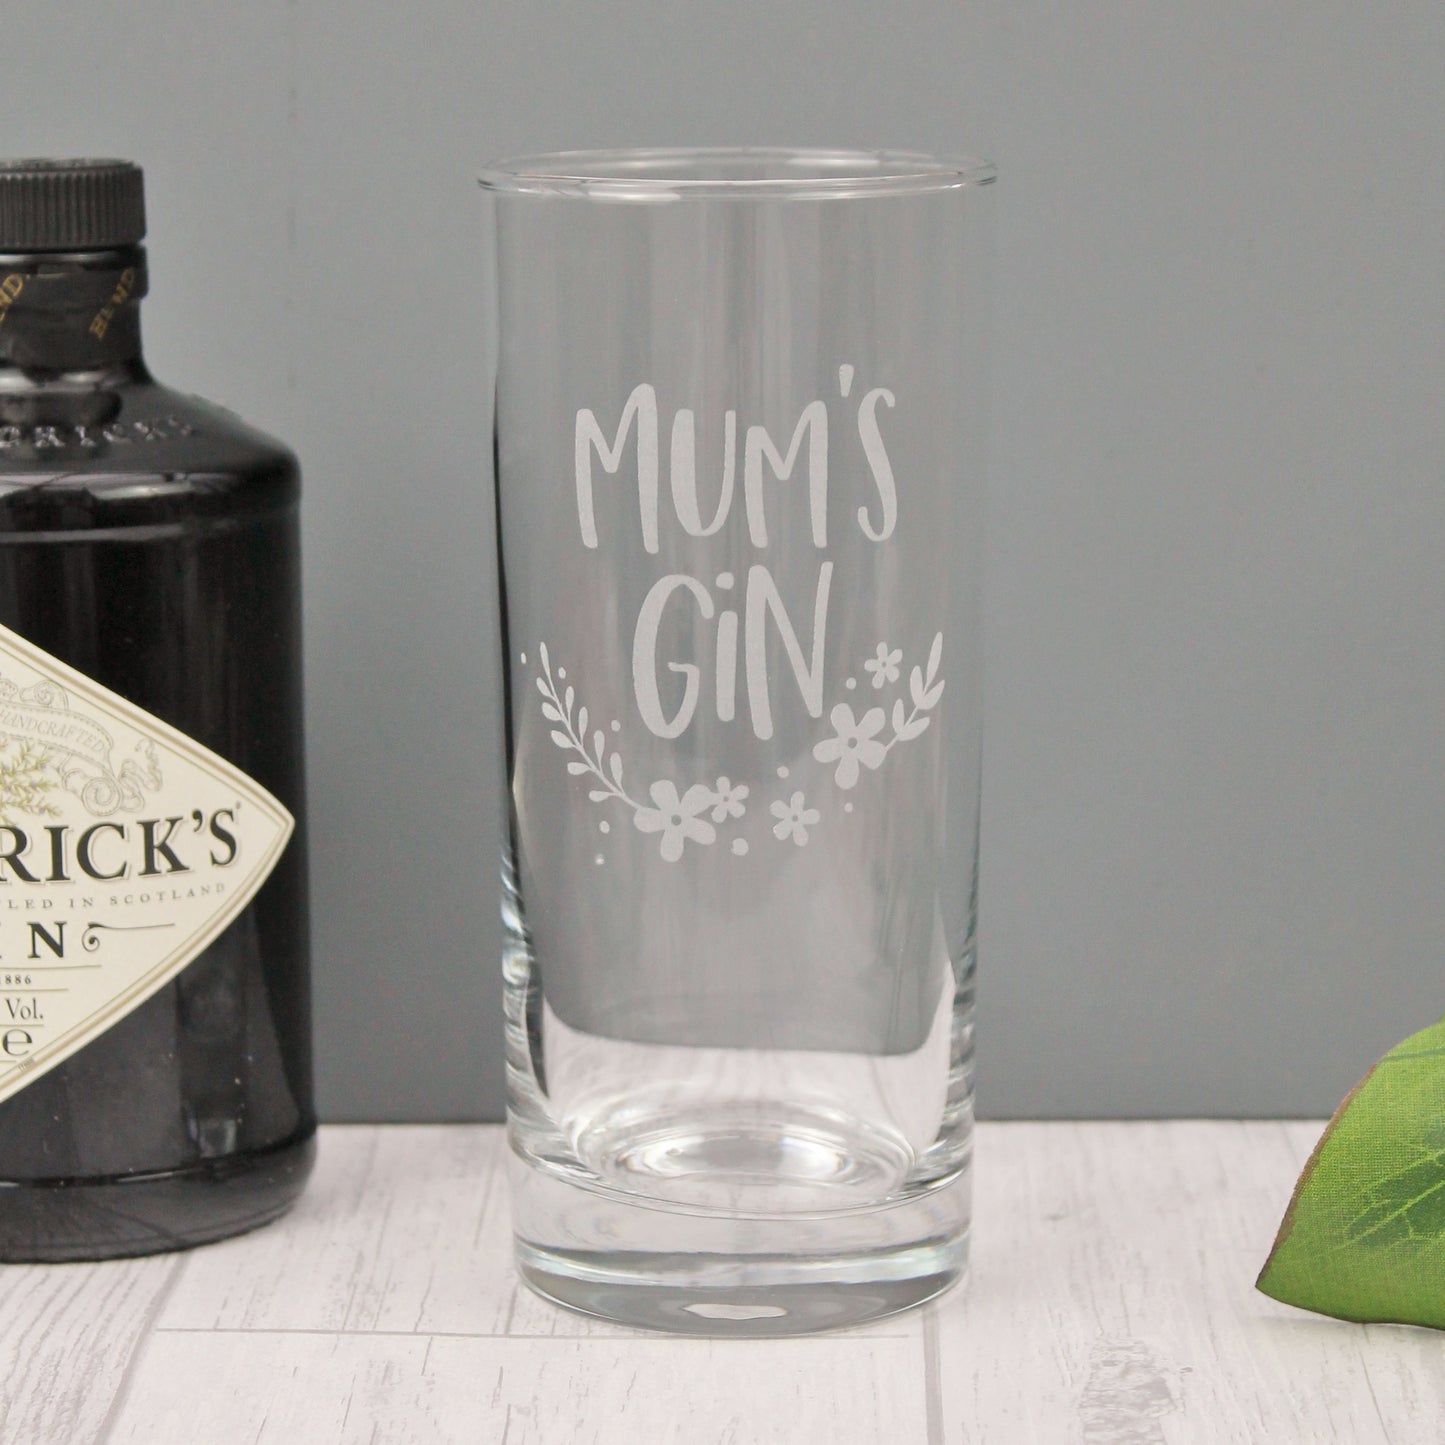 Mums gin, engraved floral tall gin glass